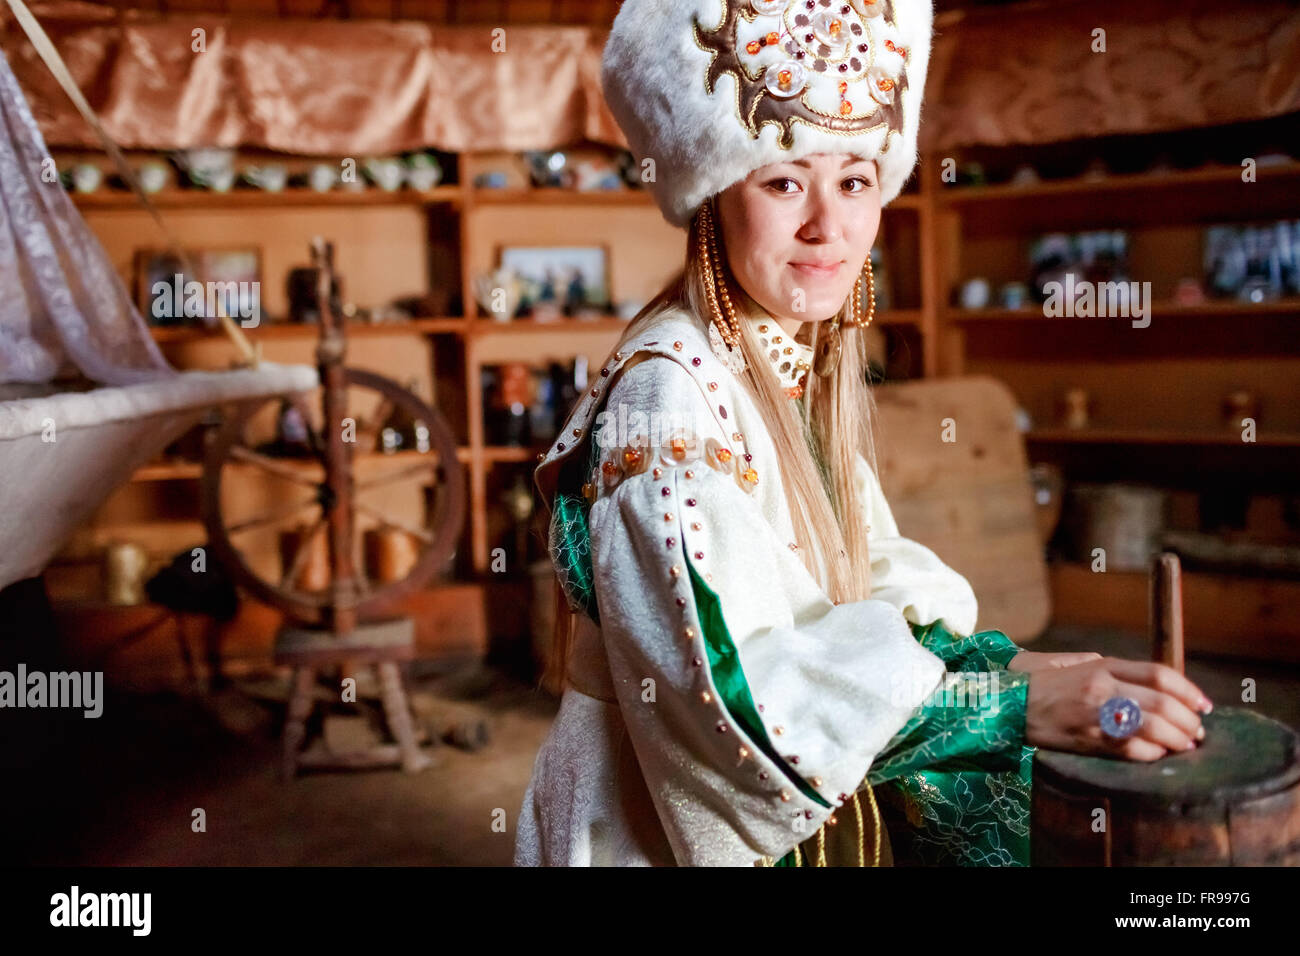 Young woman in traditional yurt dwelling. Stock Photo